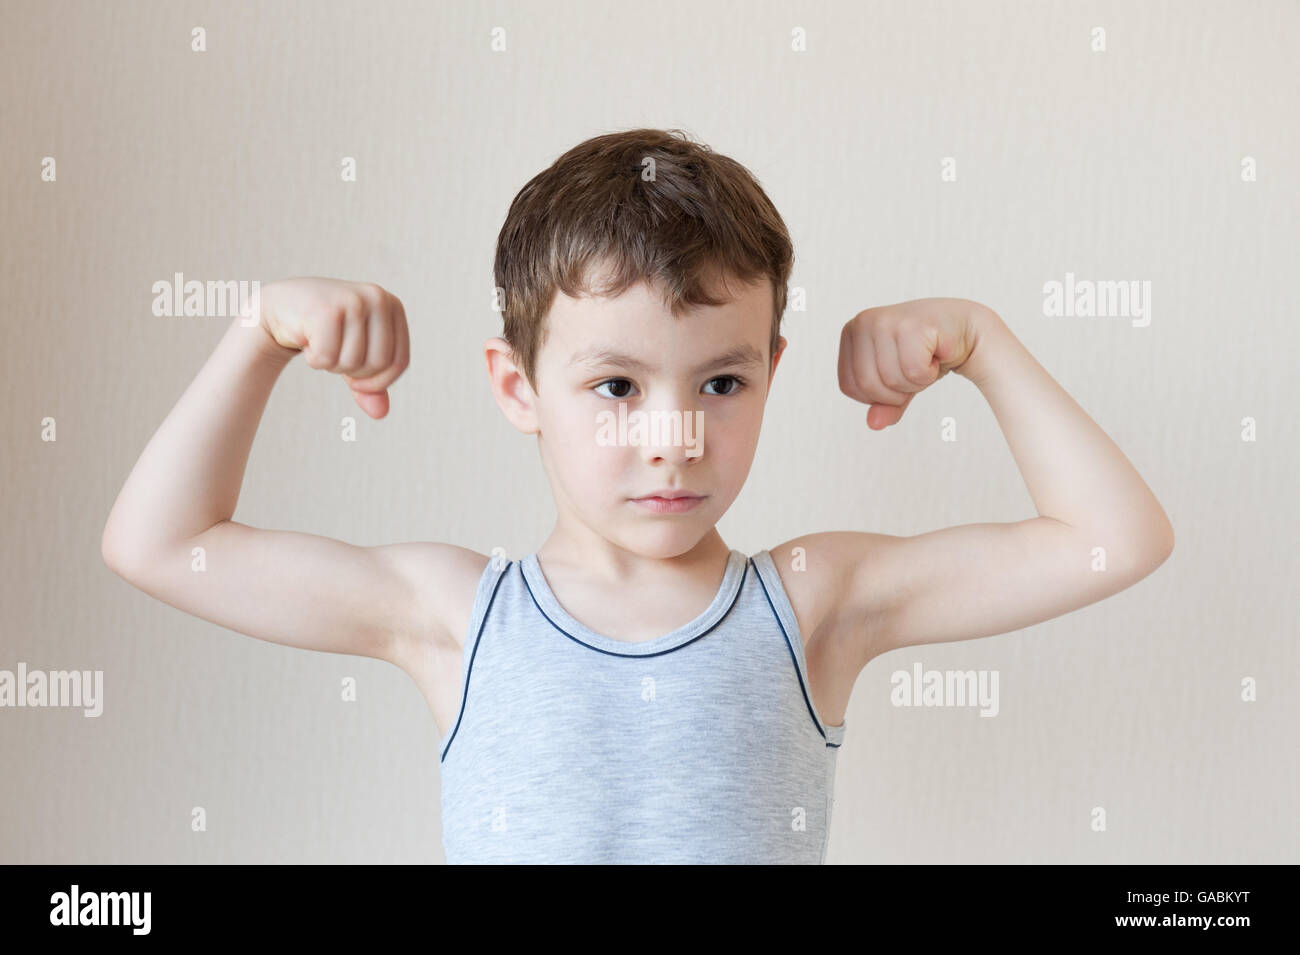 strong little boy in t-shirt showing muscles Stock Photo - Alamy